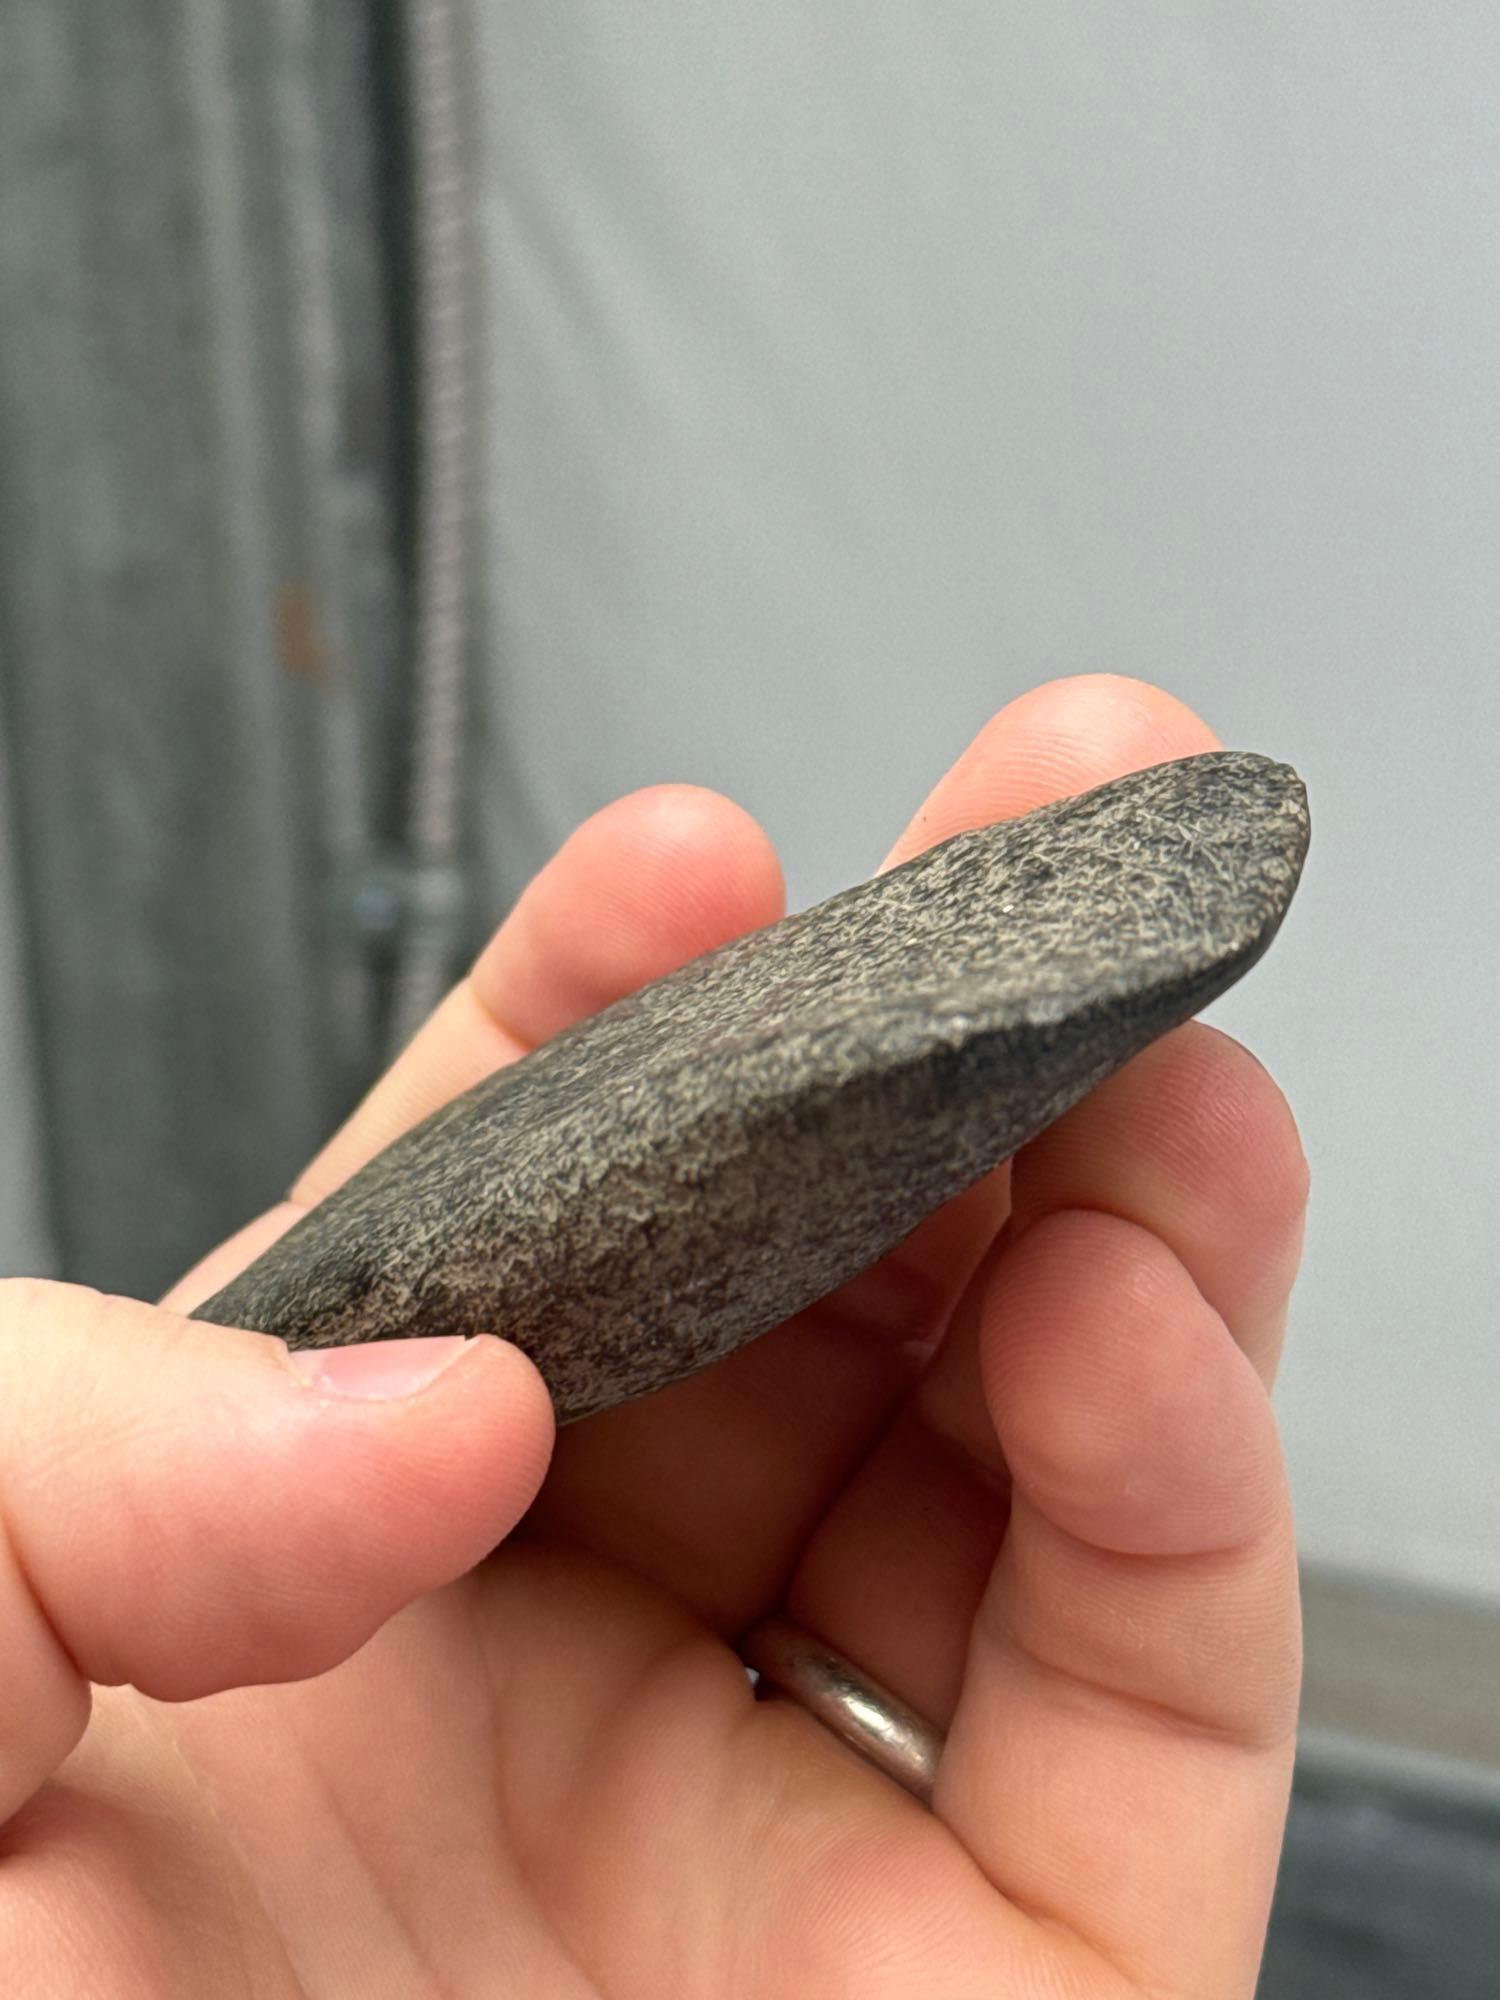 3 1/2" Fine Shallow Gouge, Found in Sussex Co., New Jersey, Ex: Mert Hendershot Collection